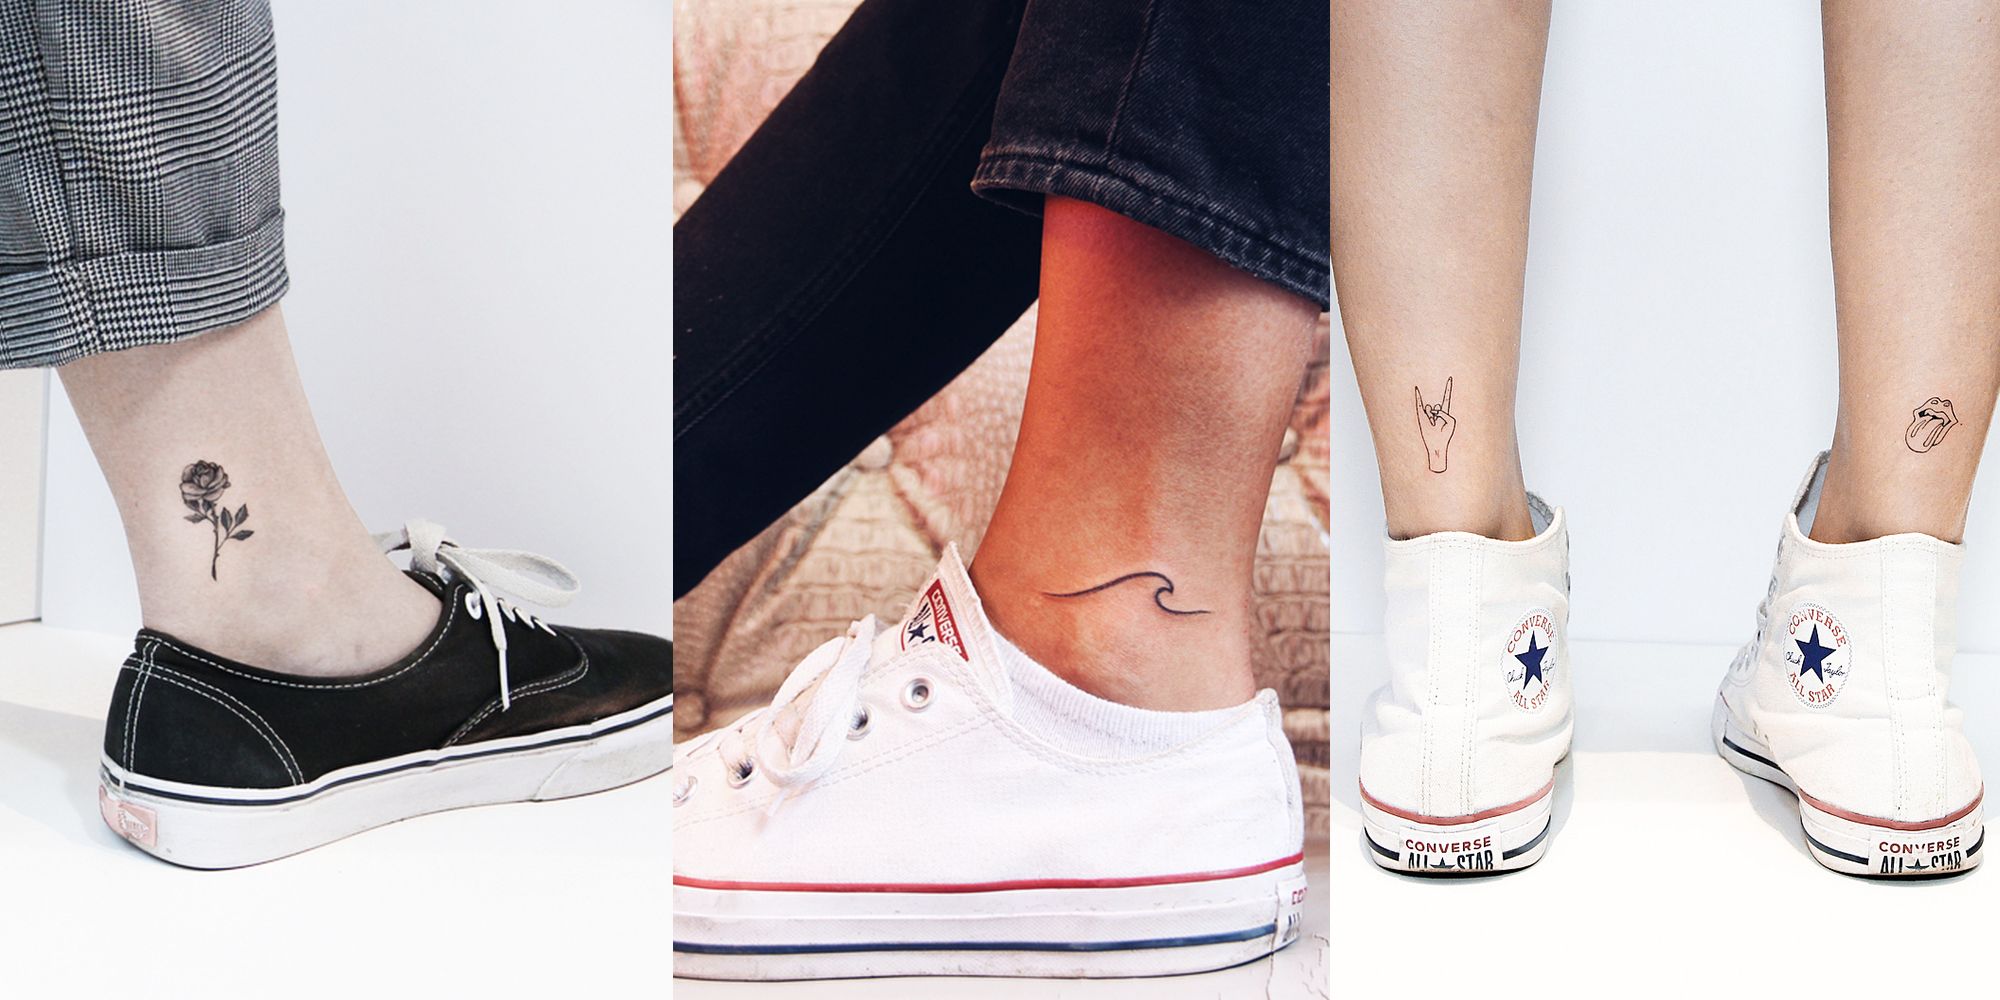 40 Trendy Nautical Star Tattoos Ideas Designs  Meanings  Tattoo Me Now